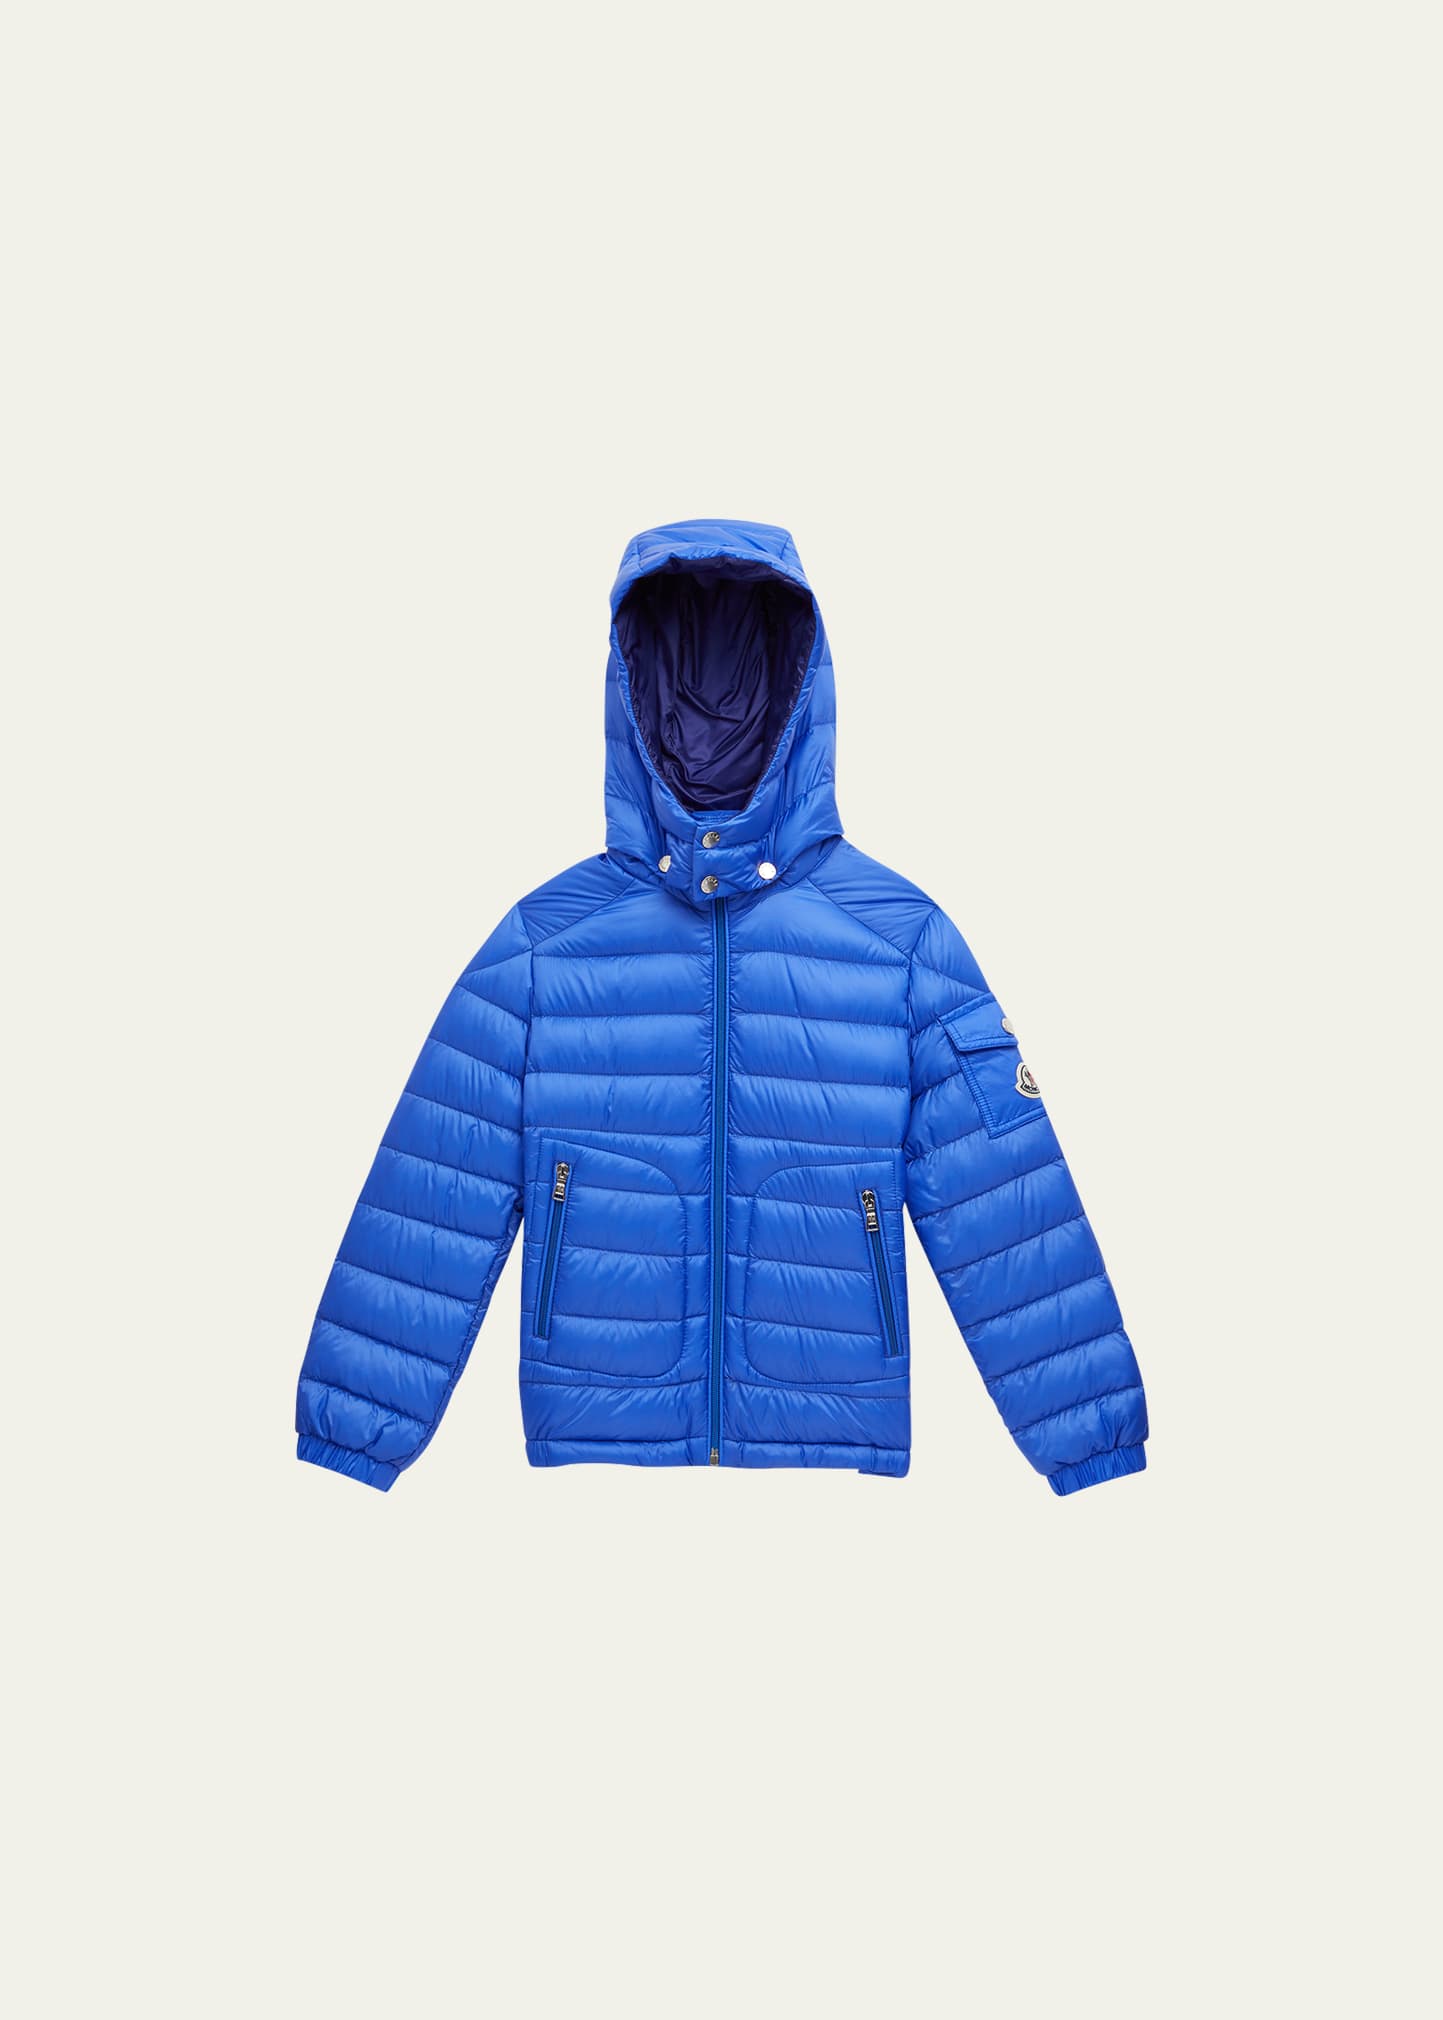 Moncler Kids' Boy's Lauros Puffer Jacket In Bright Blue